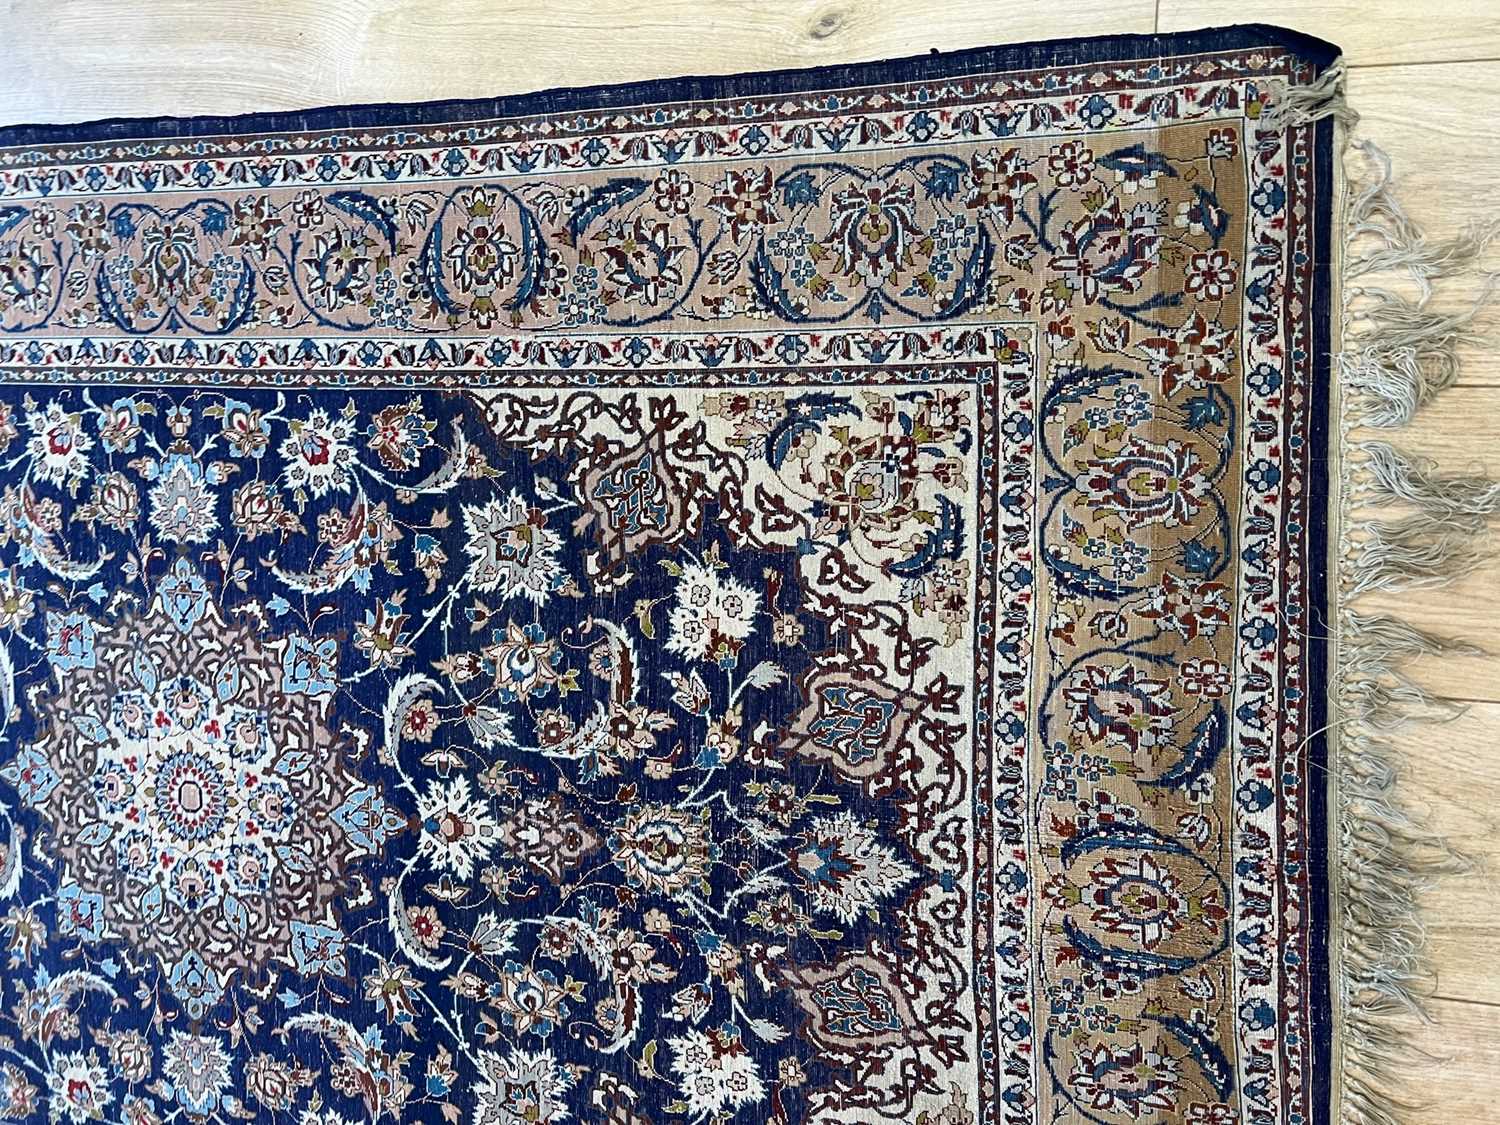 A FINE PART SILK ISFAHAN CARPET, NORTH WEST PERSIA - Image 6 of 9